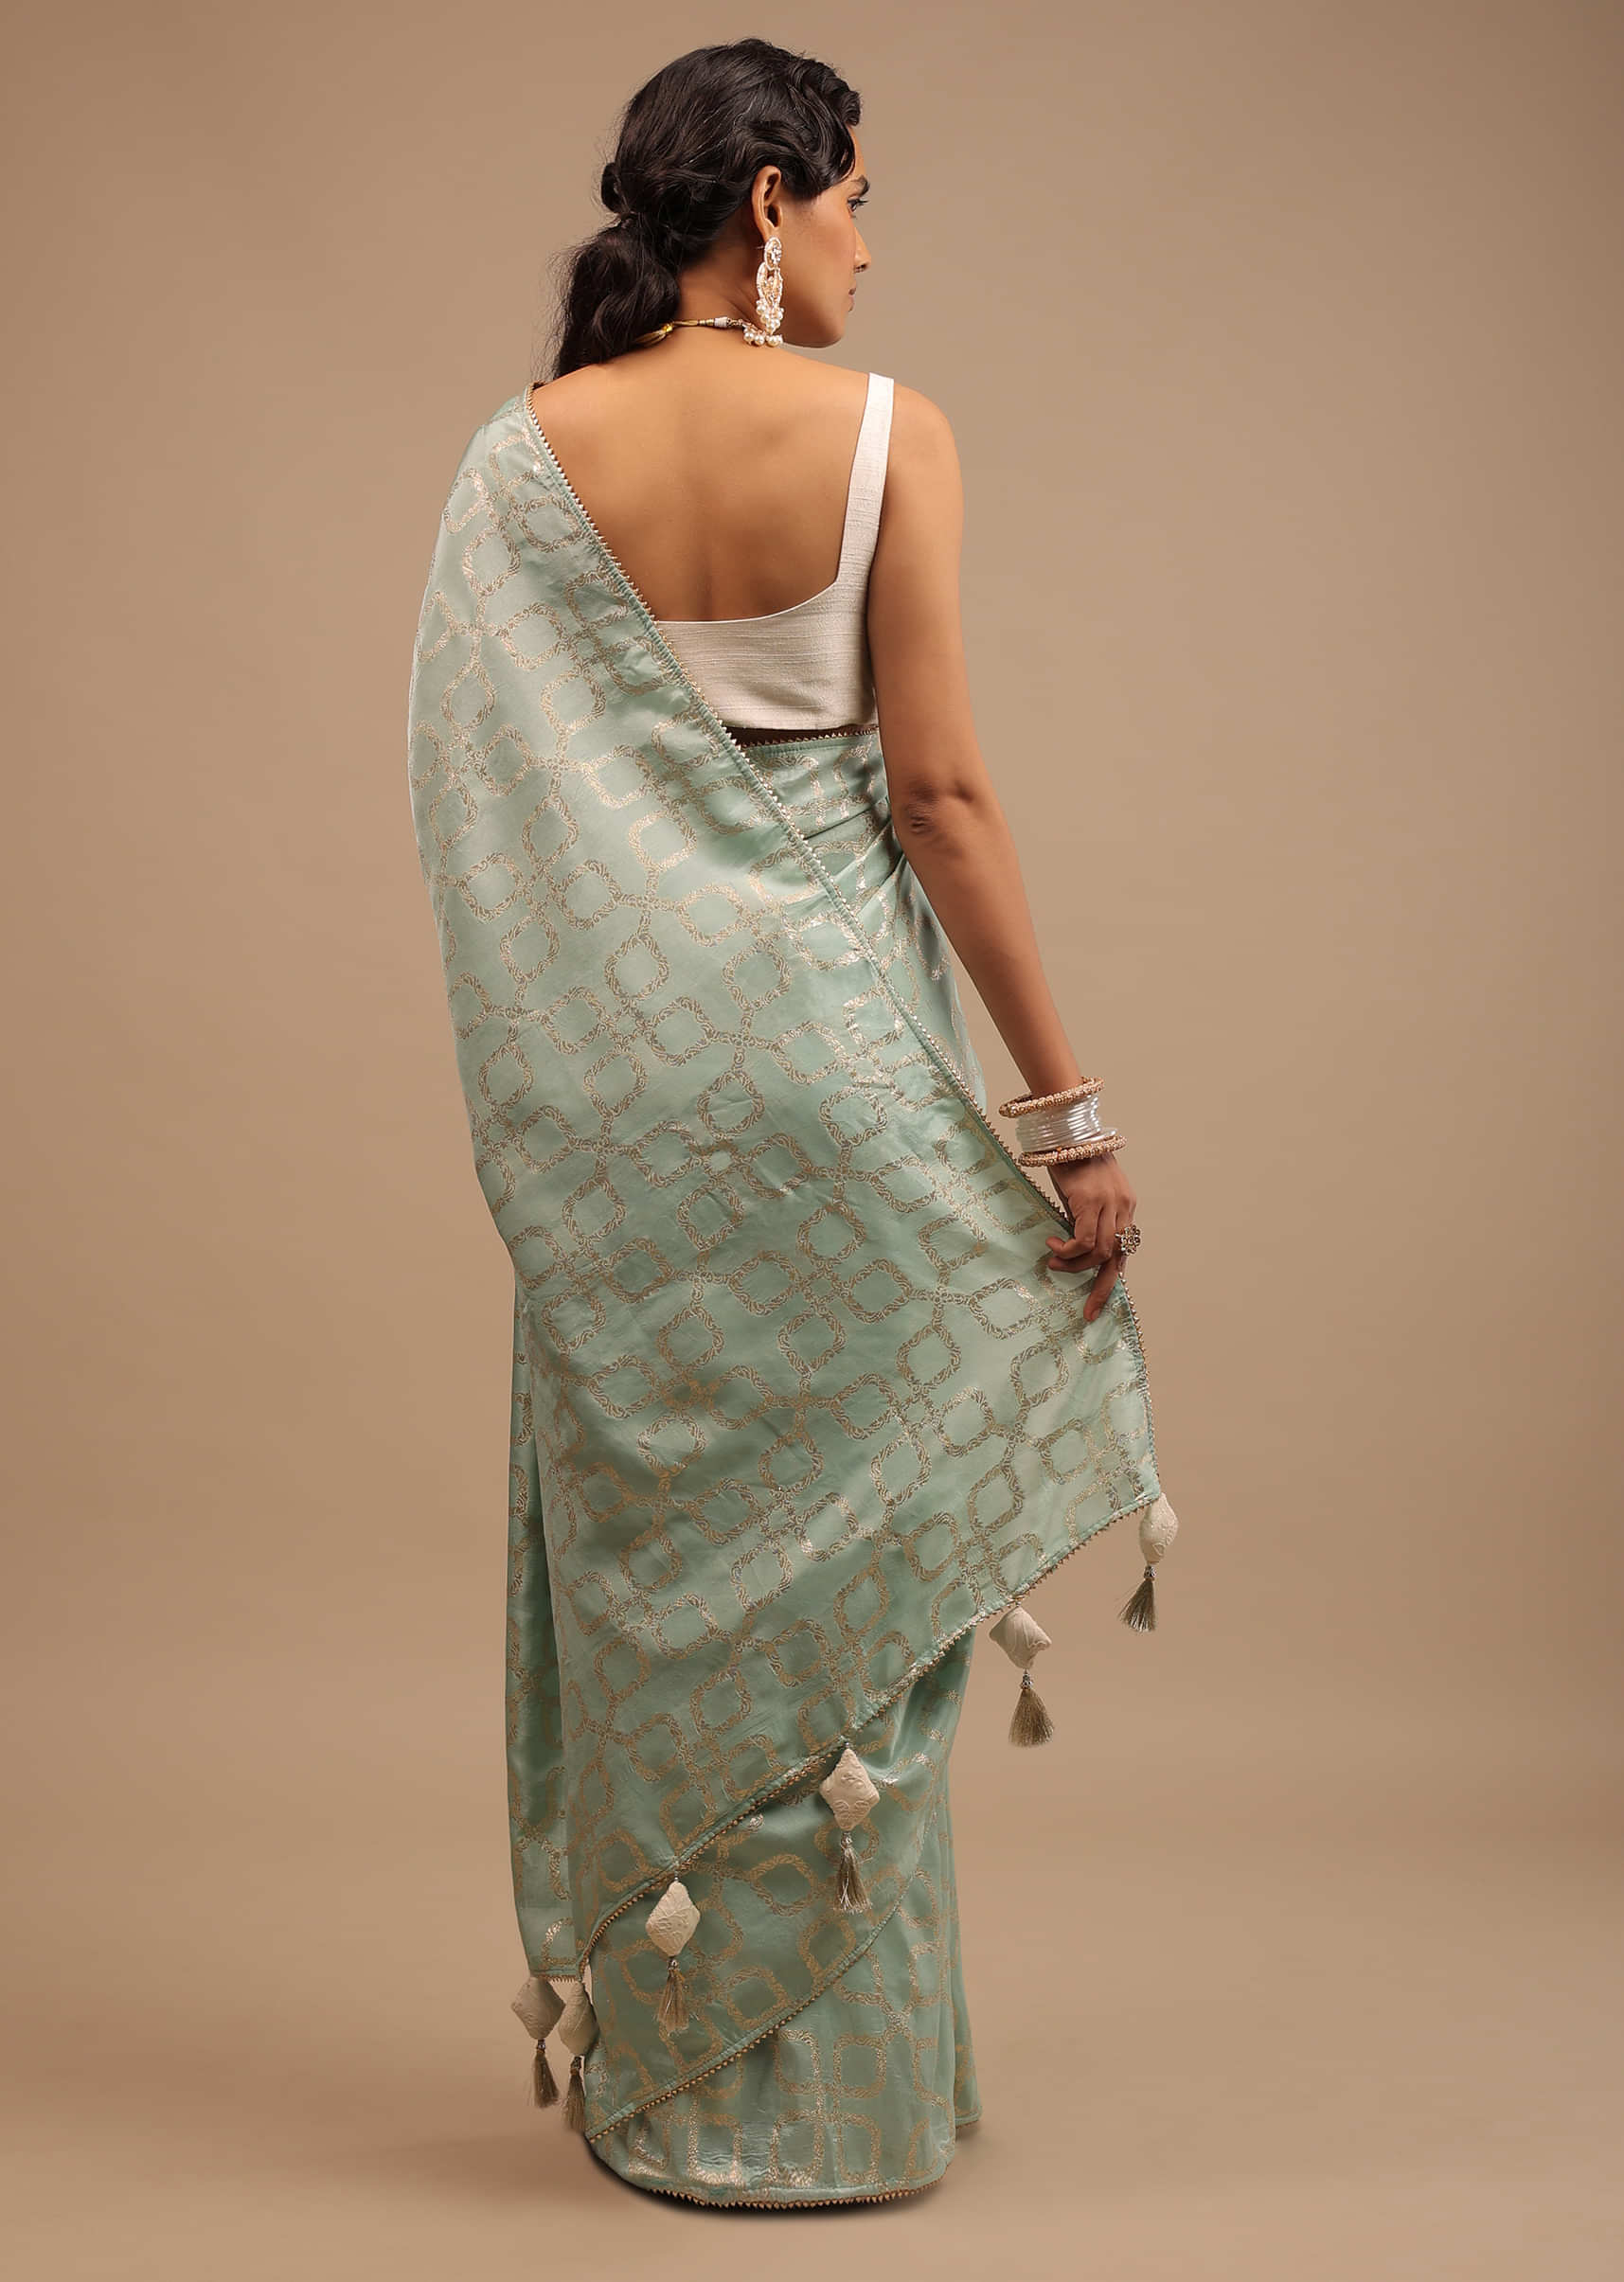 Powder Blue Saree In Dola Silk With Lurex Woven Geometric Jaal And Unstitched Lucknowi Blouse